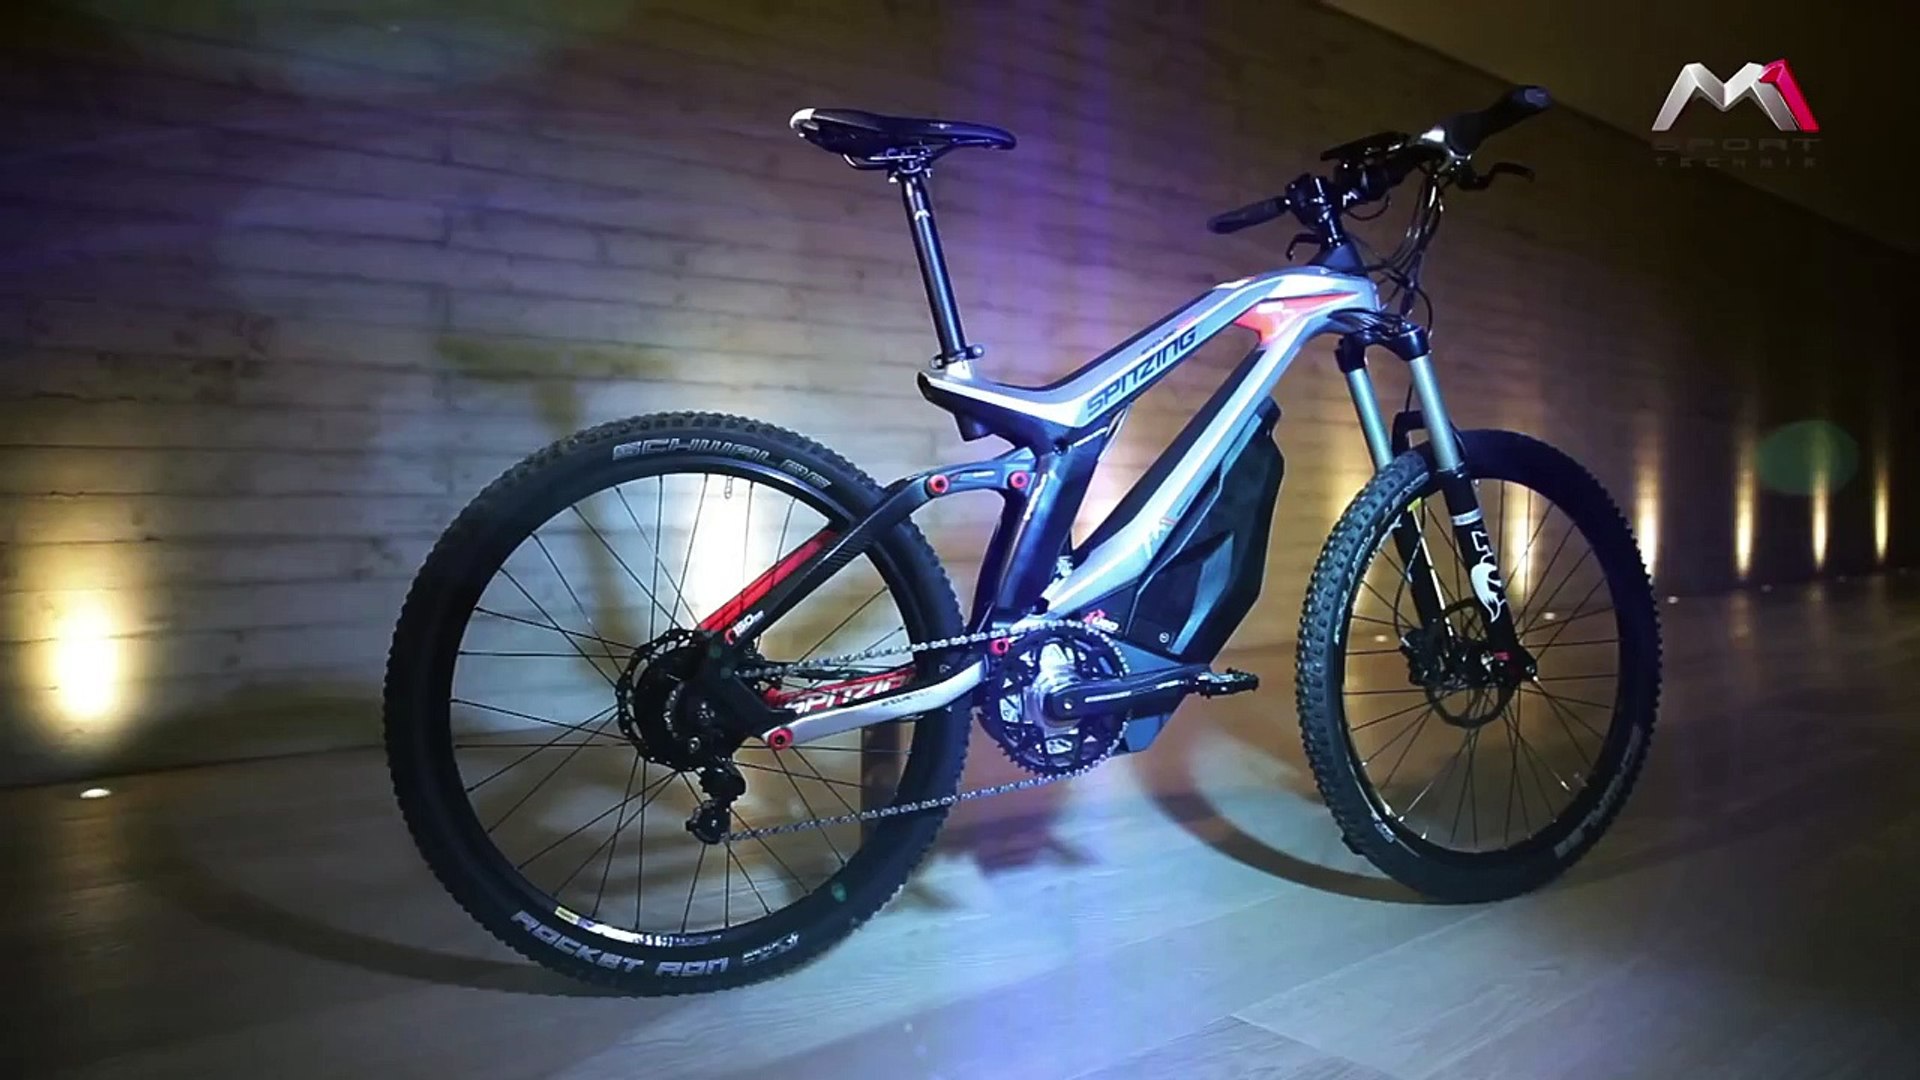 M1-SPITZING Strongest legal E-Bike and Pedelec Made in Germany - video  Dailymotion